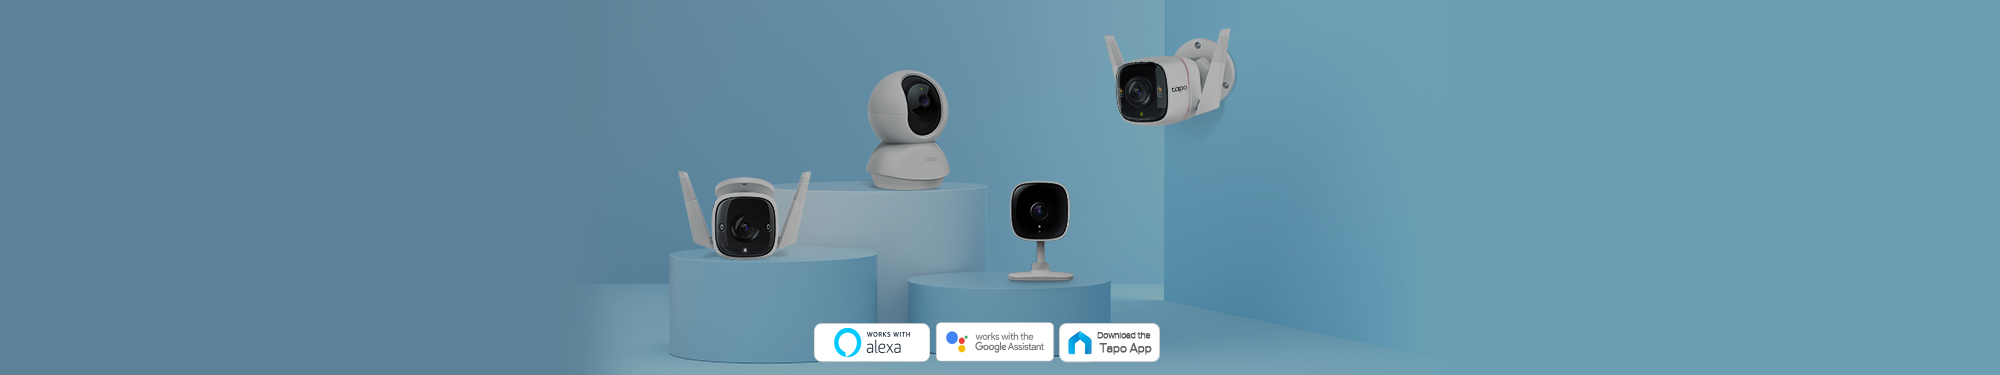 TP-Link Tapo 2K Home Indoor Security Wi-Fi Camera 2 Pack (Tapo C110P2)